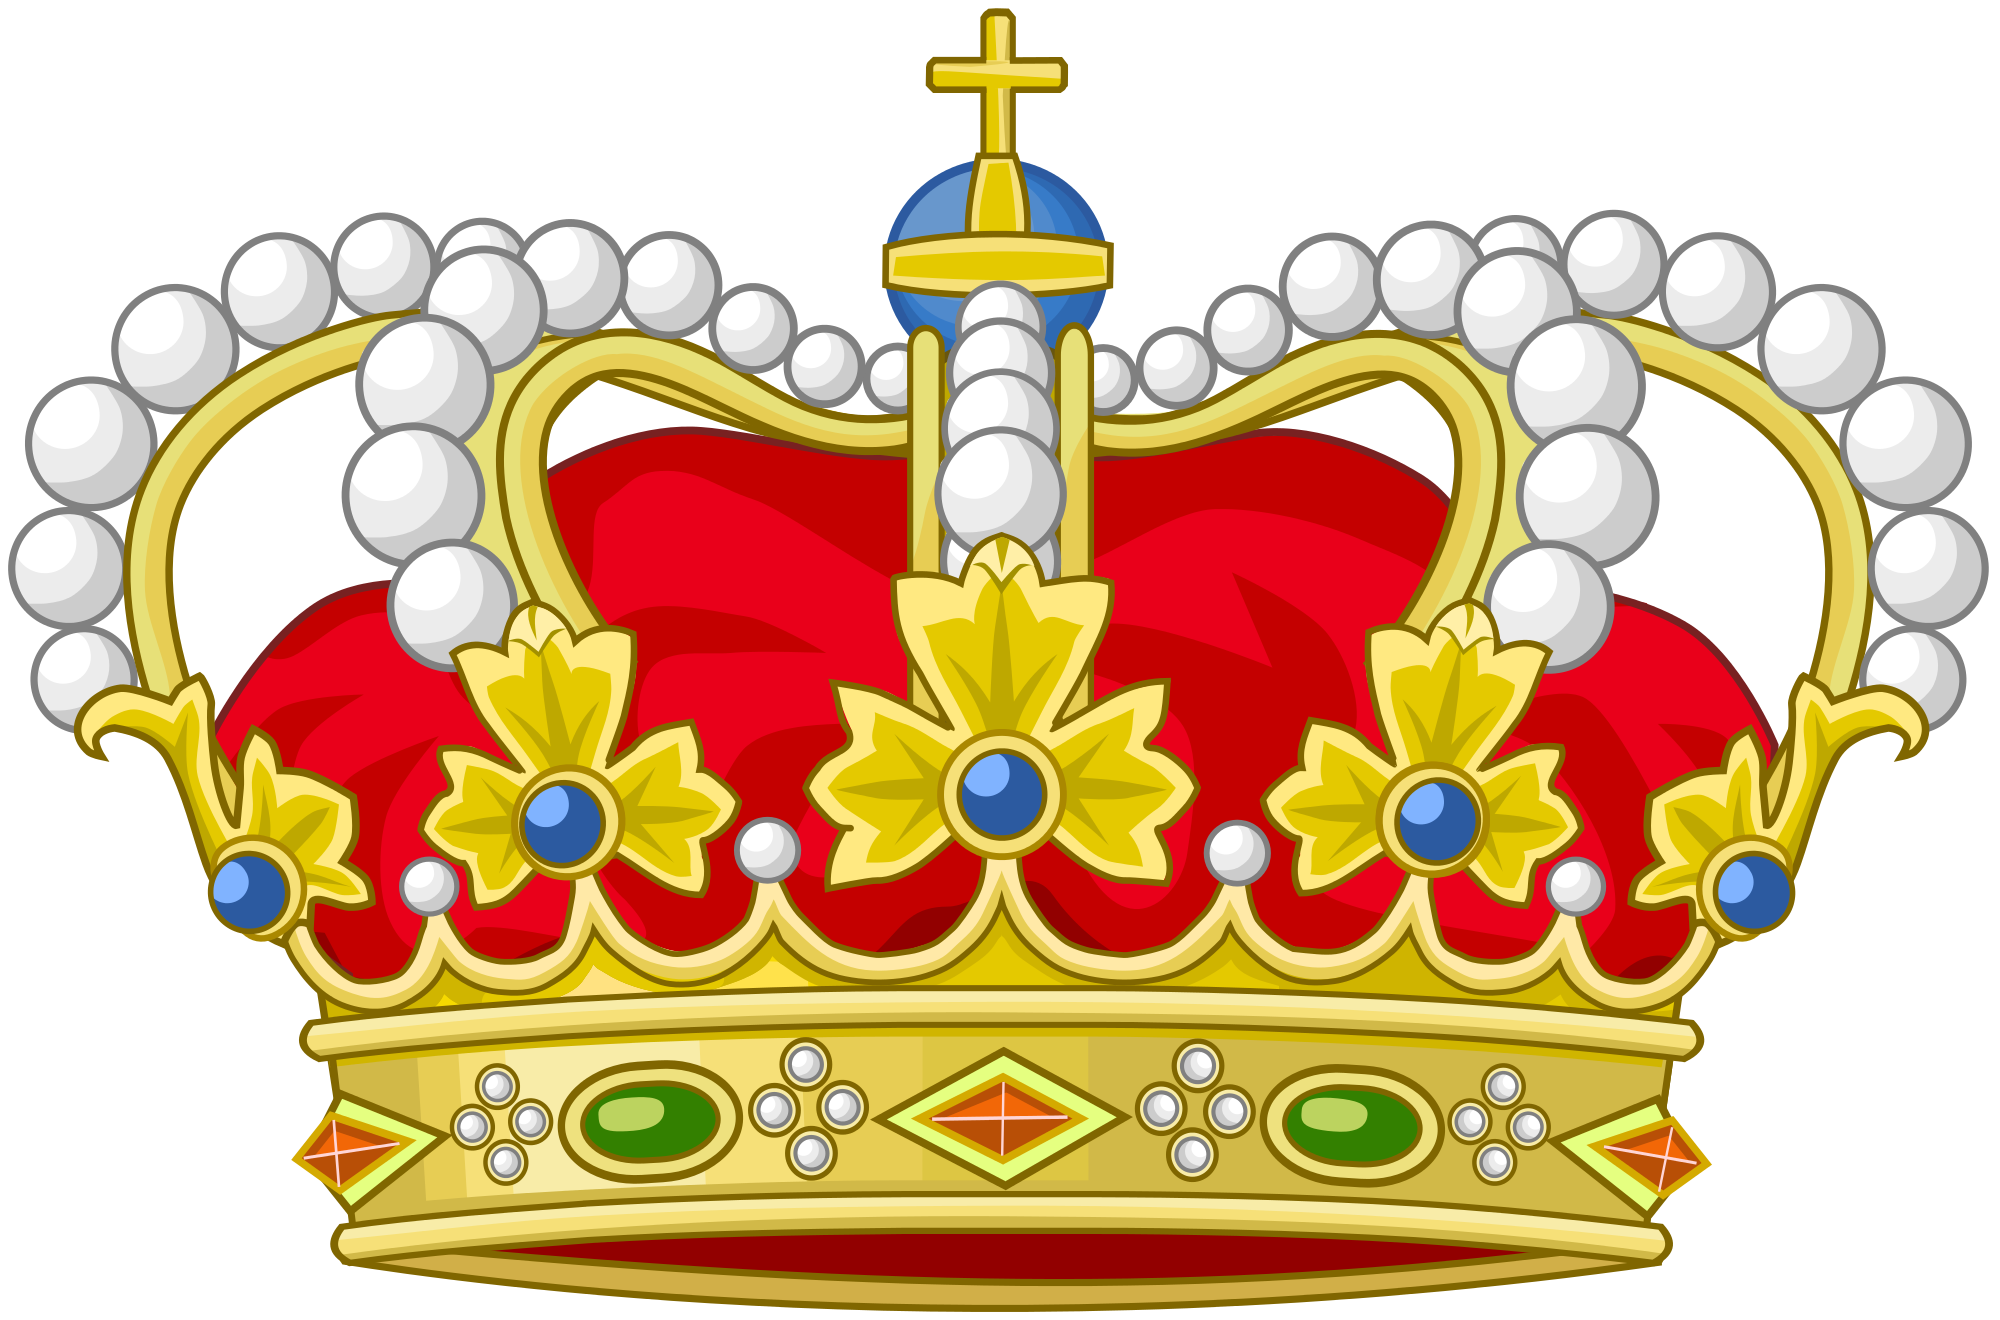 Crown clipart royal crown, Crown royal crown Transparent FREE for